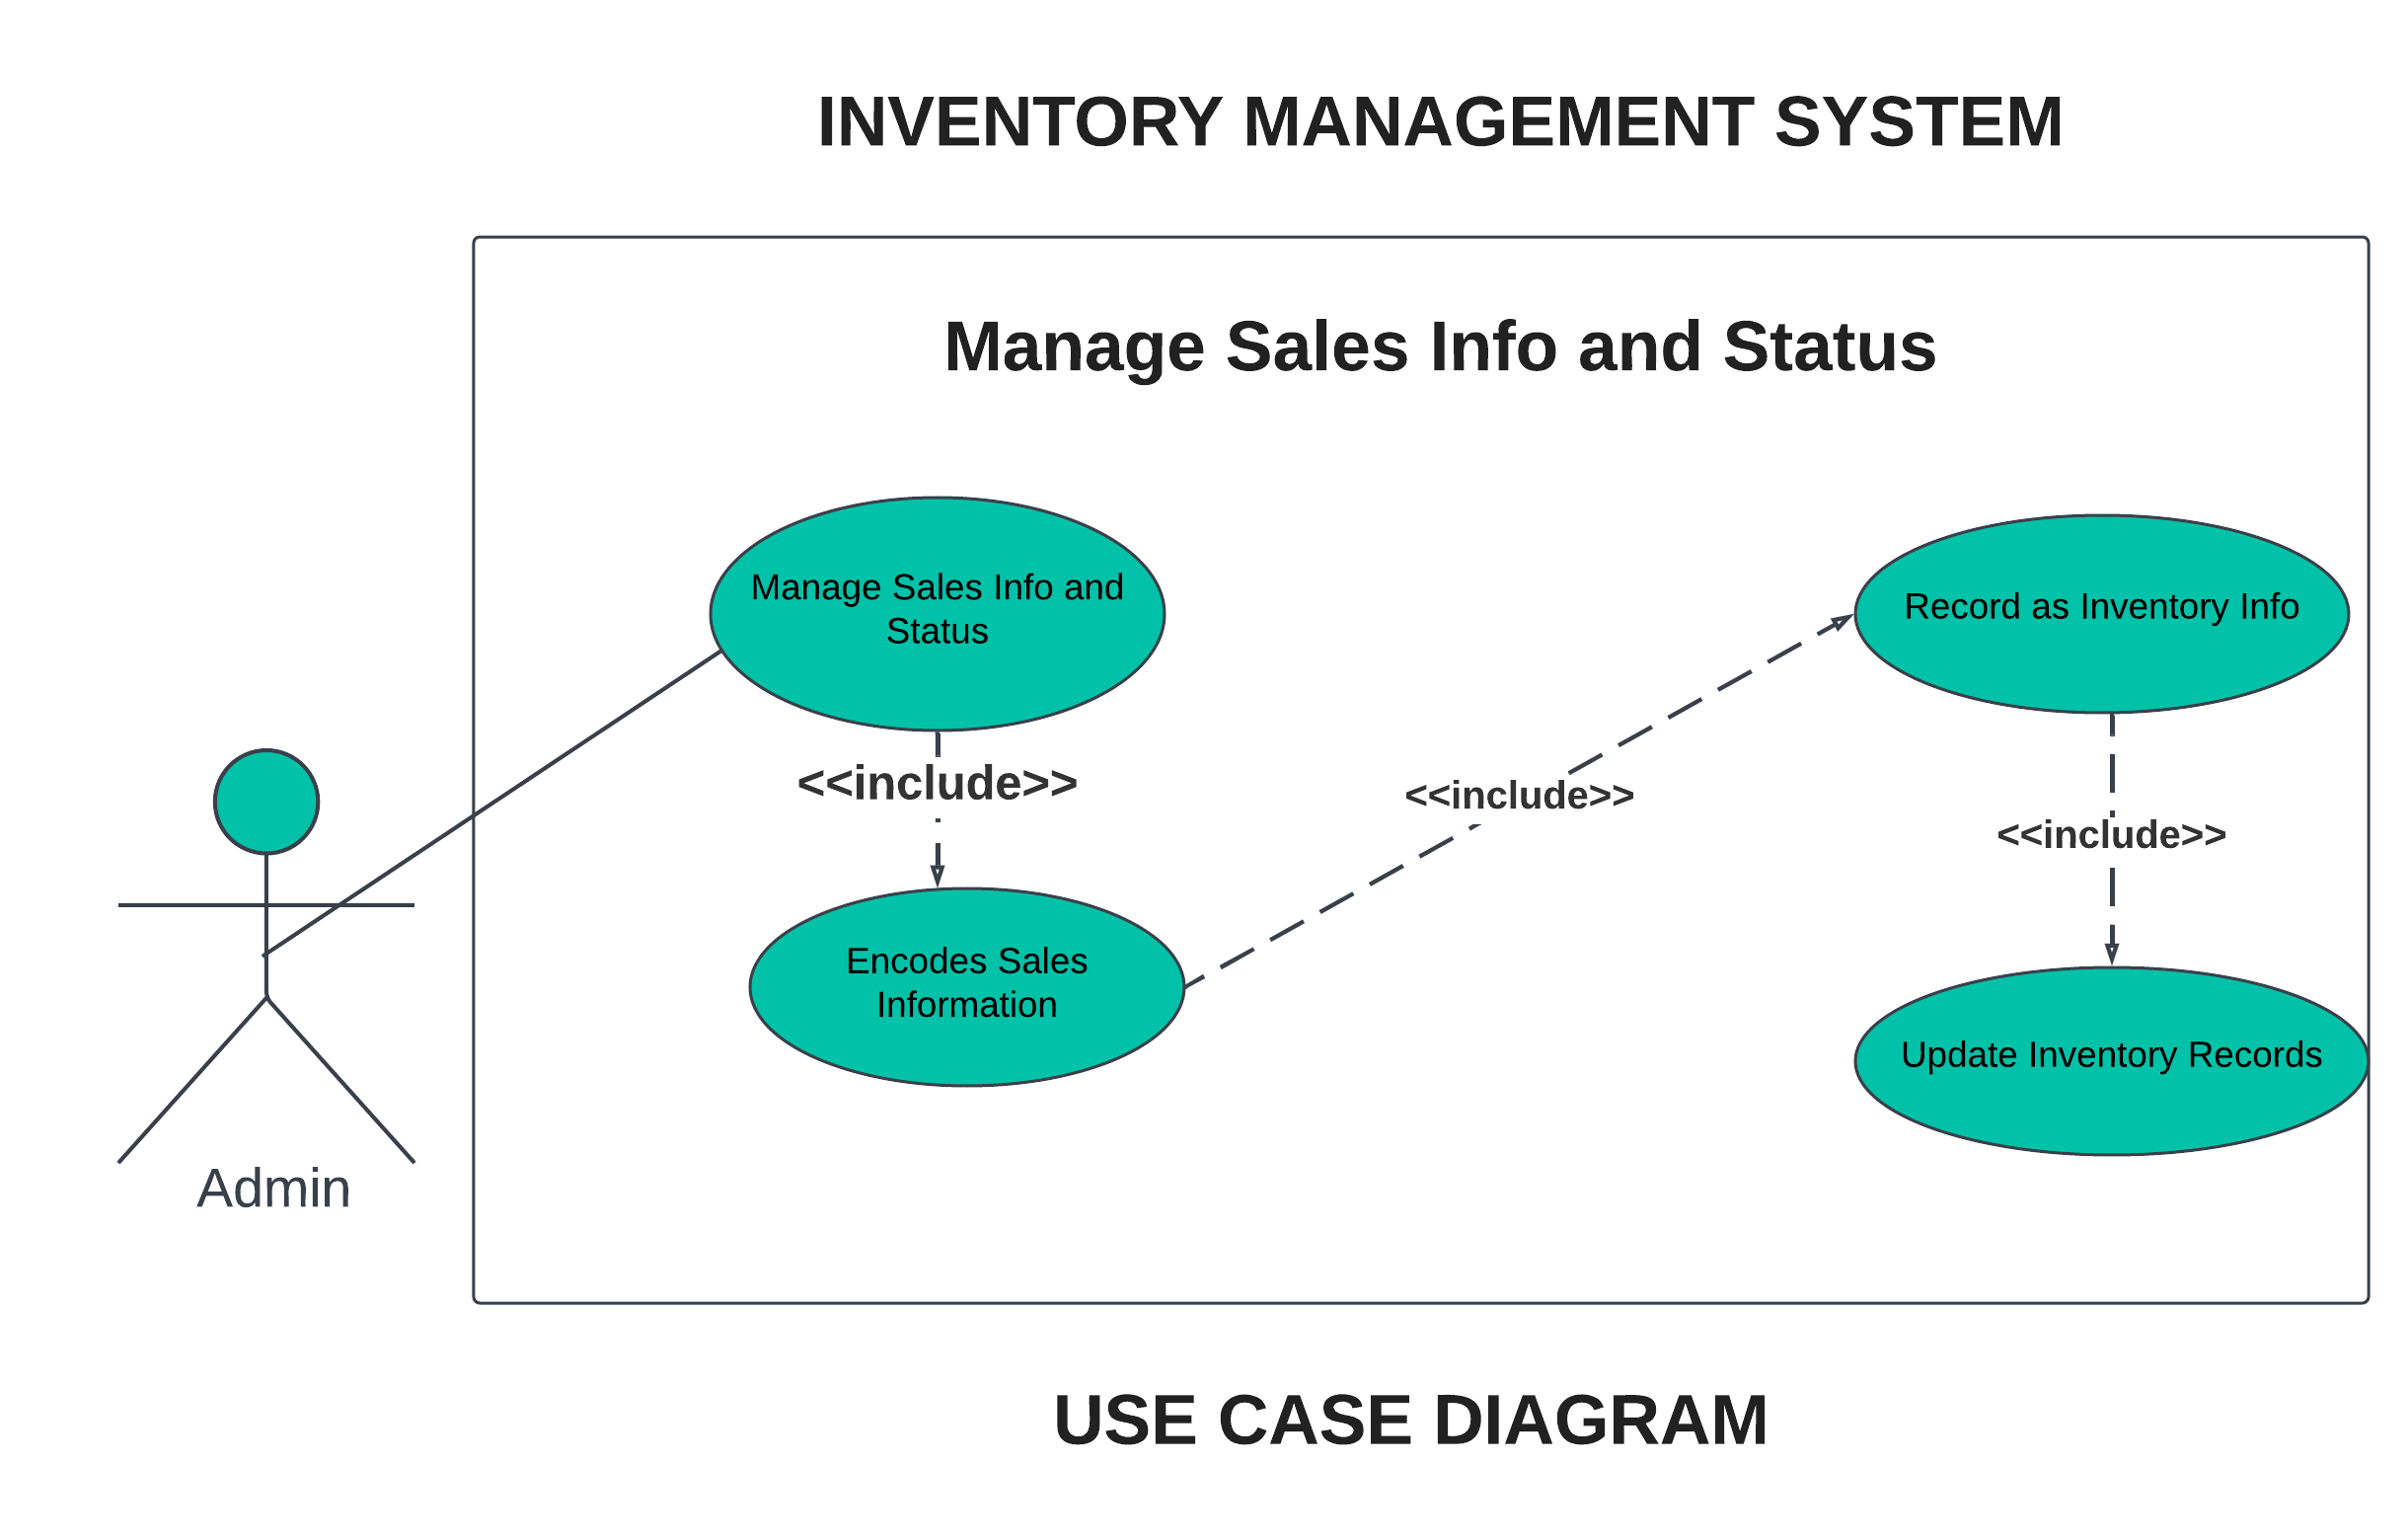 MANAGE SALES INFO AND STATUS USE CASE DIAGRAM